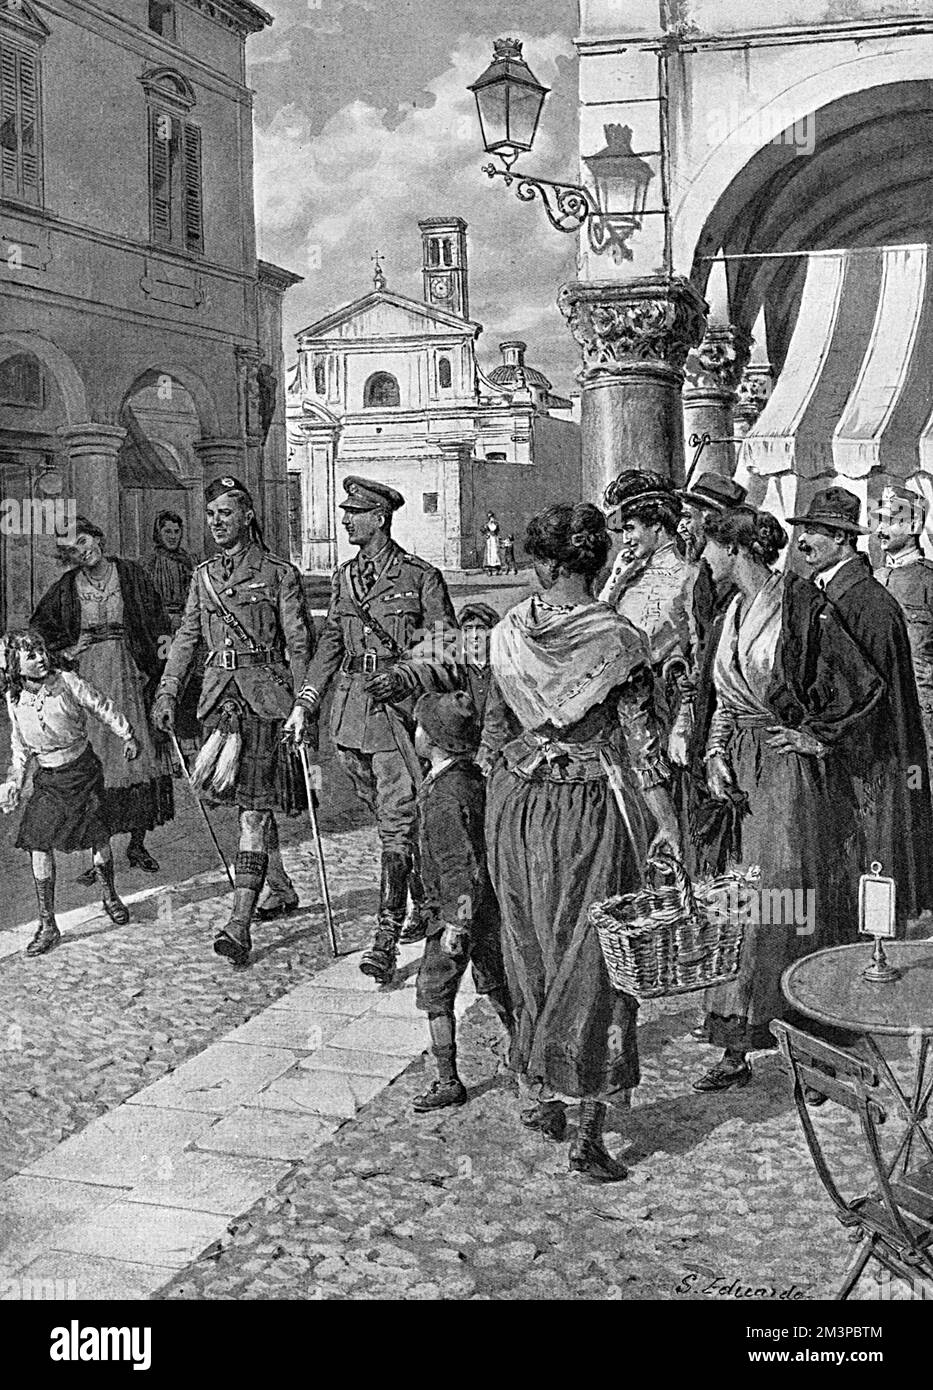 A Highland officer wearing his kilt attracts much attention as he walks down the main street of a little town in Italy during the First World War.  Women stand and cast admiring glances while curious children run in front of him.  The kilted Highland regiments were a novelty in Europe and attracted admiration in France, Belgium and Italy.       Date: 1918 Stock Photo